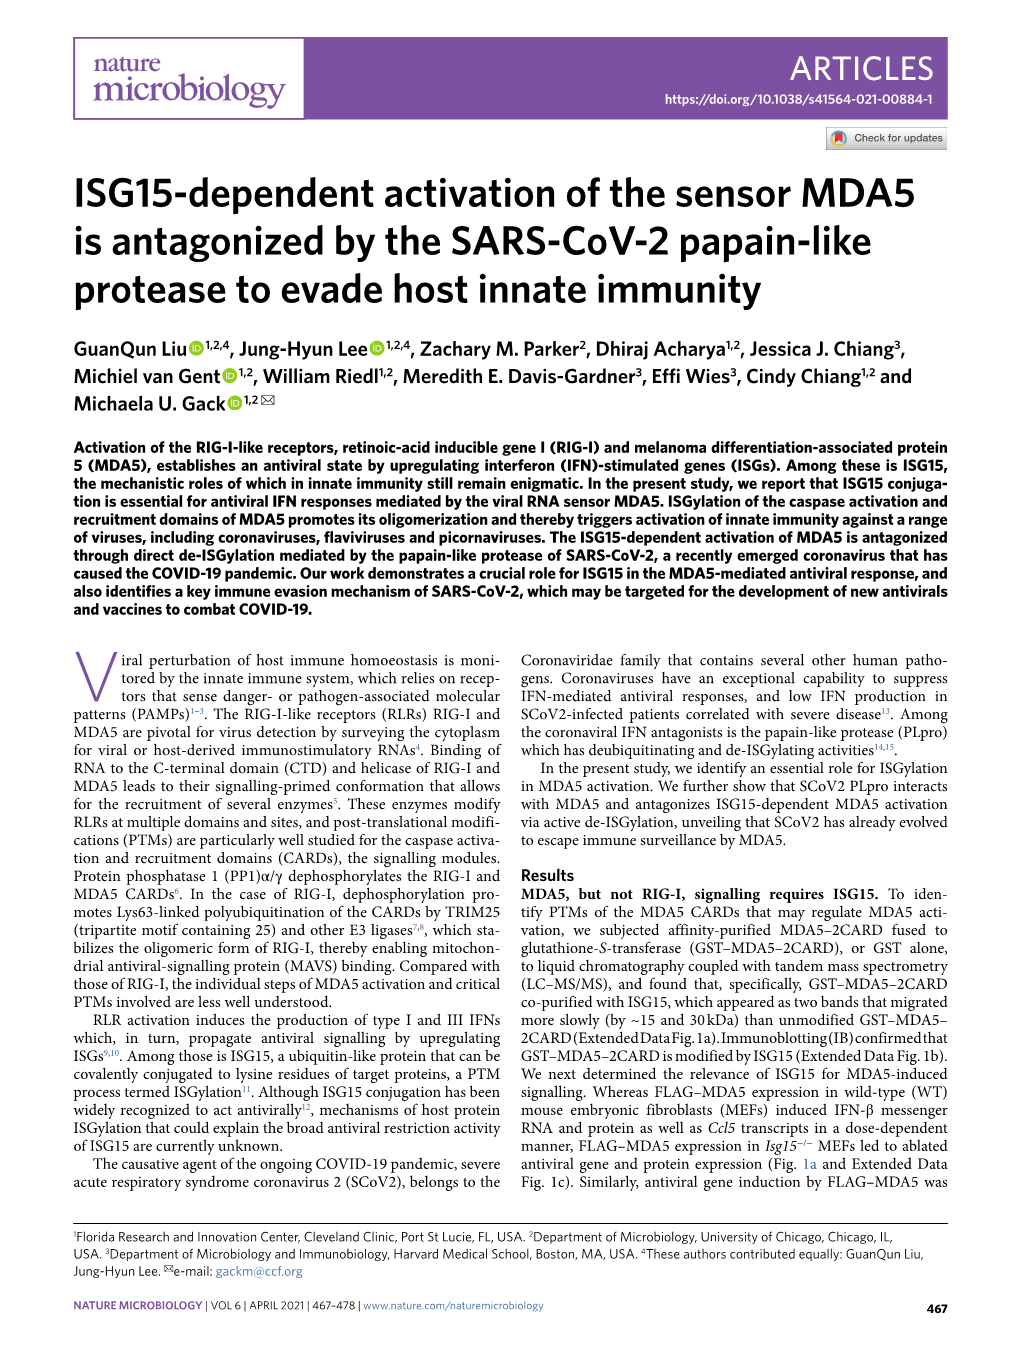 ISG15-Dependent Activation of the Sensor MDA5 Is Antagonized by the SARS-Cov-2 Papain-Like Protease to Evade Host Innate Immunity